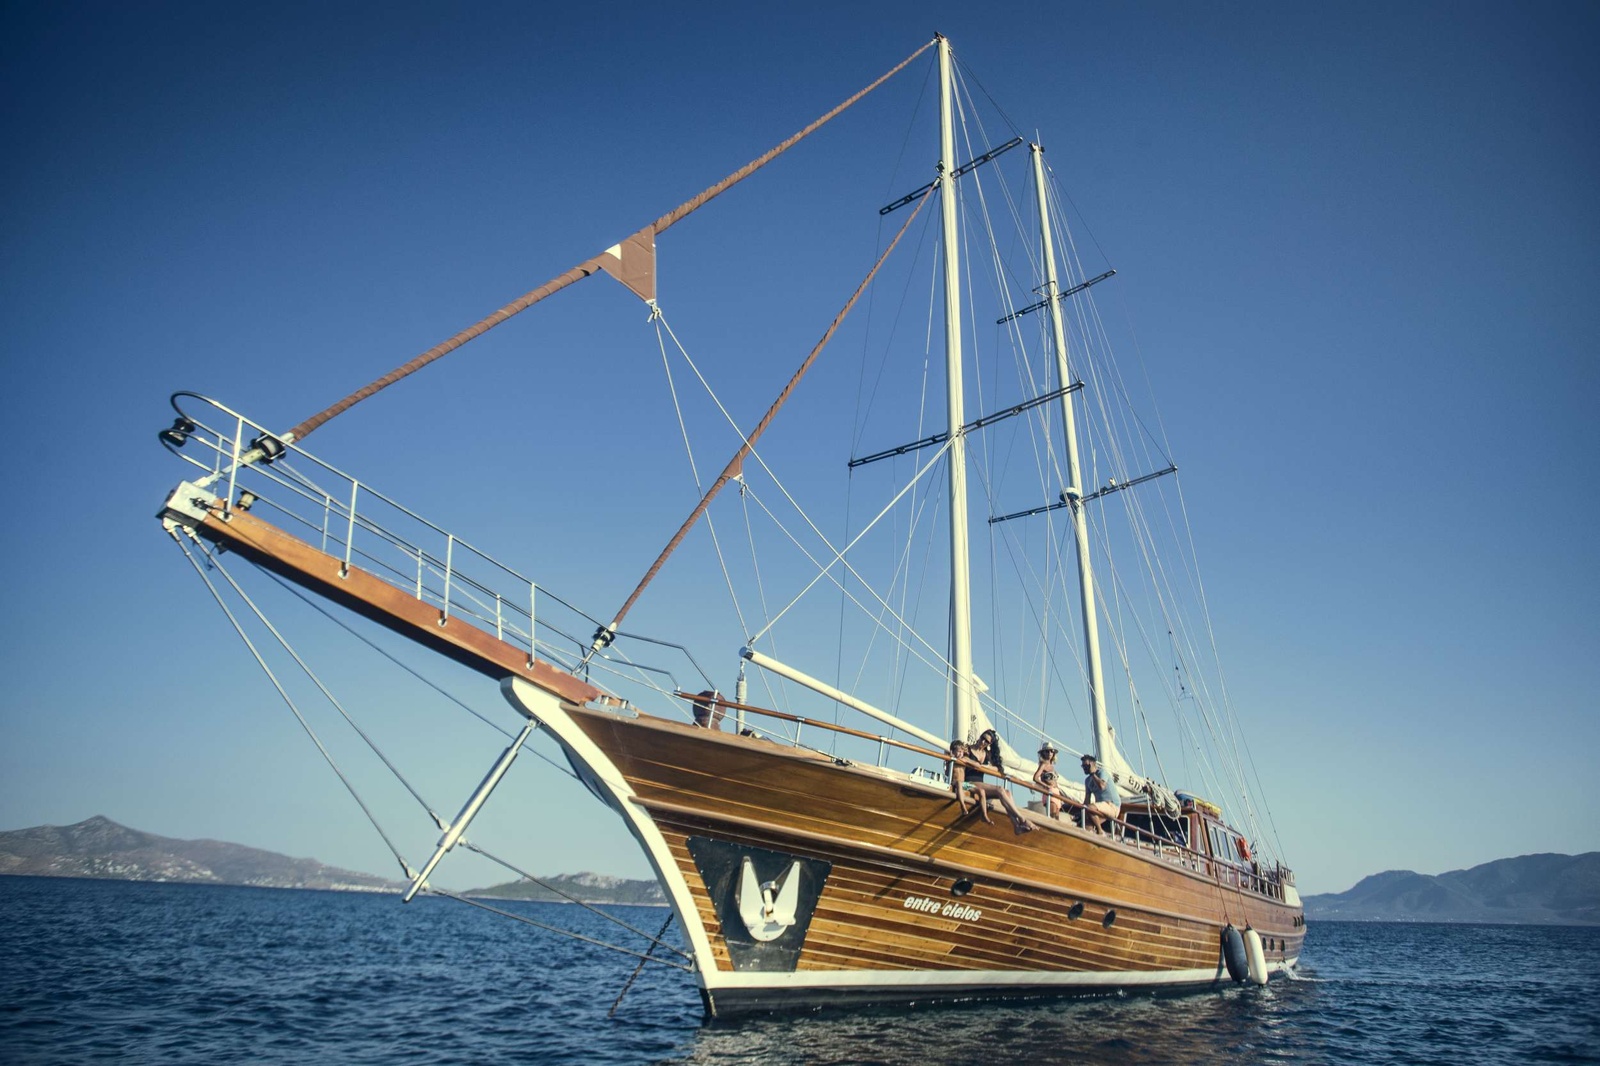 Imagine exploring the Greek islands on a private, floating five-room boutique hotel. This is no maritime dream: You’re cruising the Mediterranean on S/Y Entre Cielos, discovering local cultures, sharing sunsets with friends, unwinding — living your life to the fullest. From Plato to Socrates, S/Y Entre Cielos’ five luxurious, air-conditioned cabins honor Greece’s most celebrated philosophers. Right down to their finest works – close at hand to skim or study. The S/Y Entre Cielos features five cabins for up to 12 guests, each named after a Greek philosopher. You’ll find the books they wrote waiting in your cabin to peruse at your leisure. Who knows? Maybe after your maritime vacation, you’ll be quoting Greek philosophy while recounting your discoveries ashore.